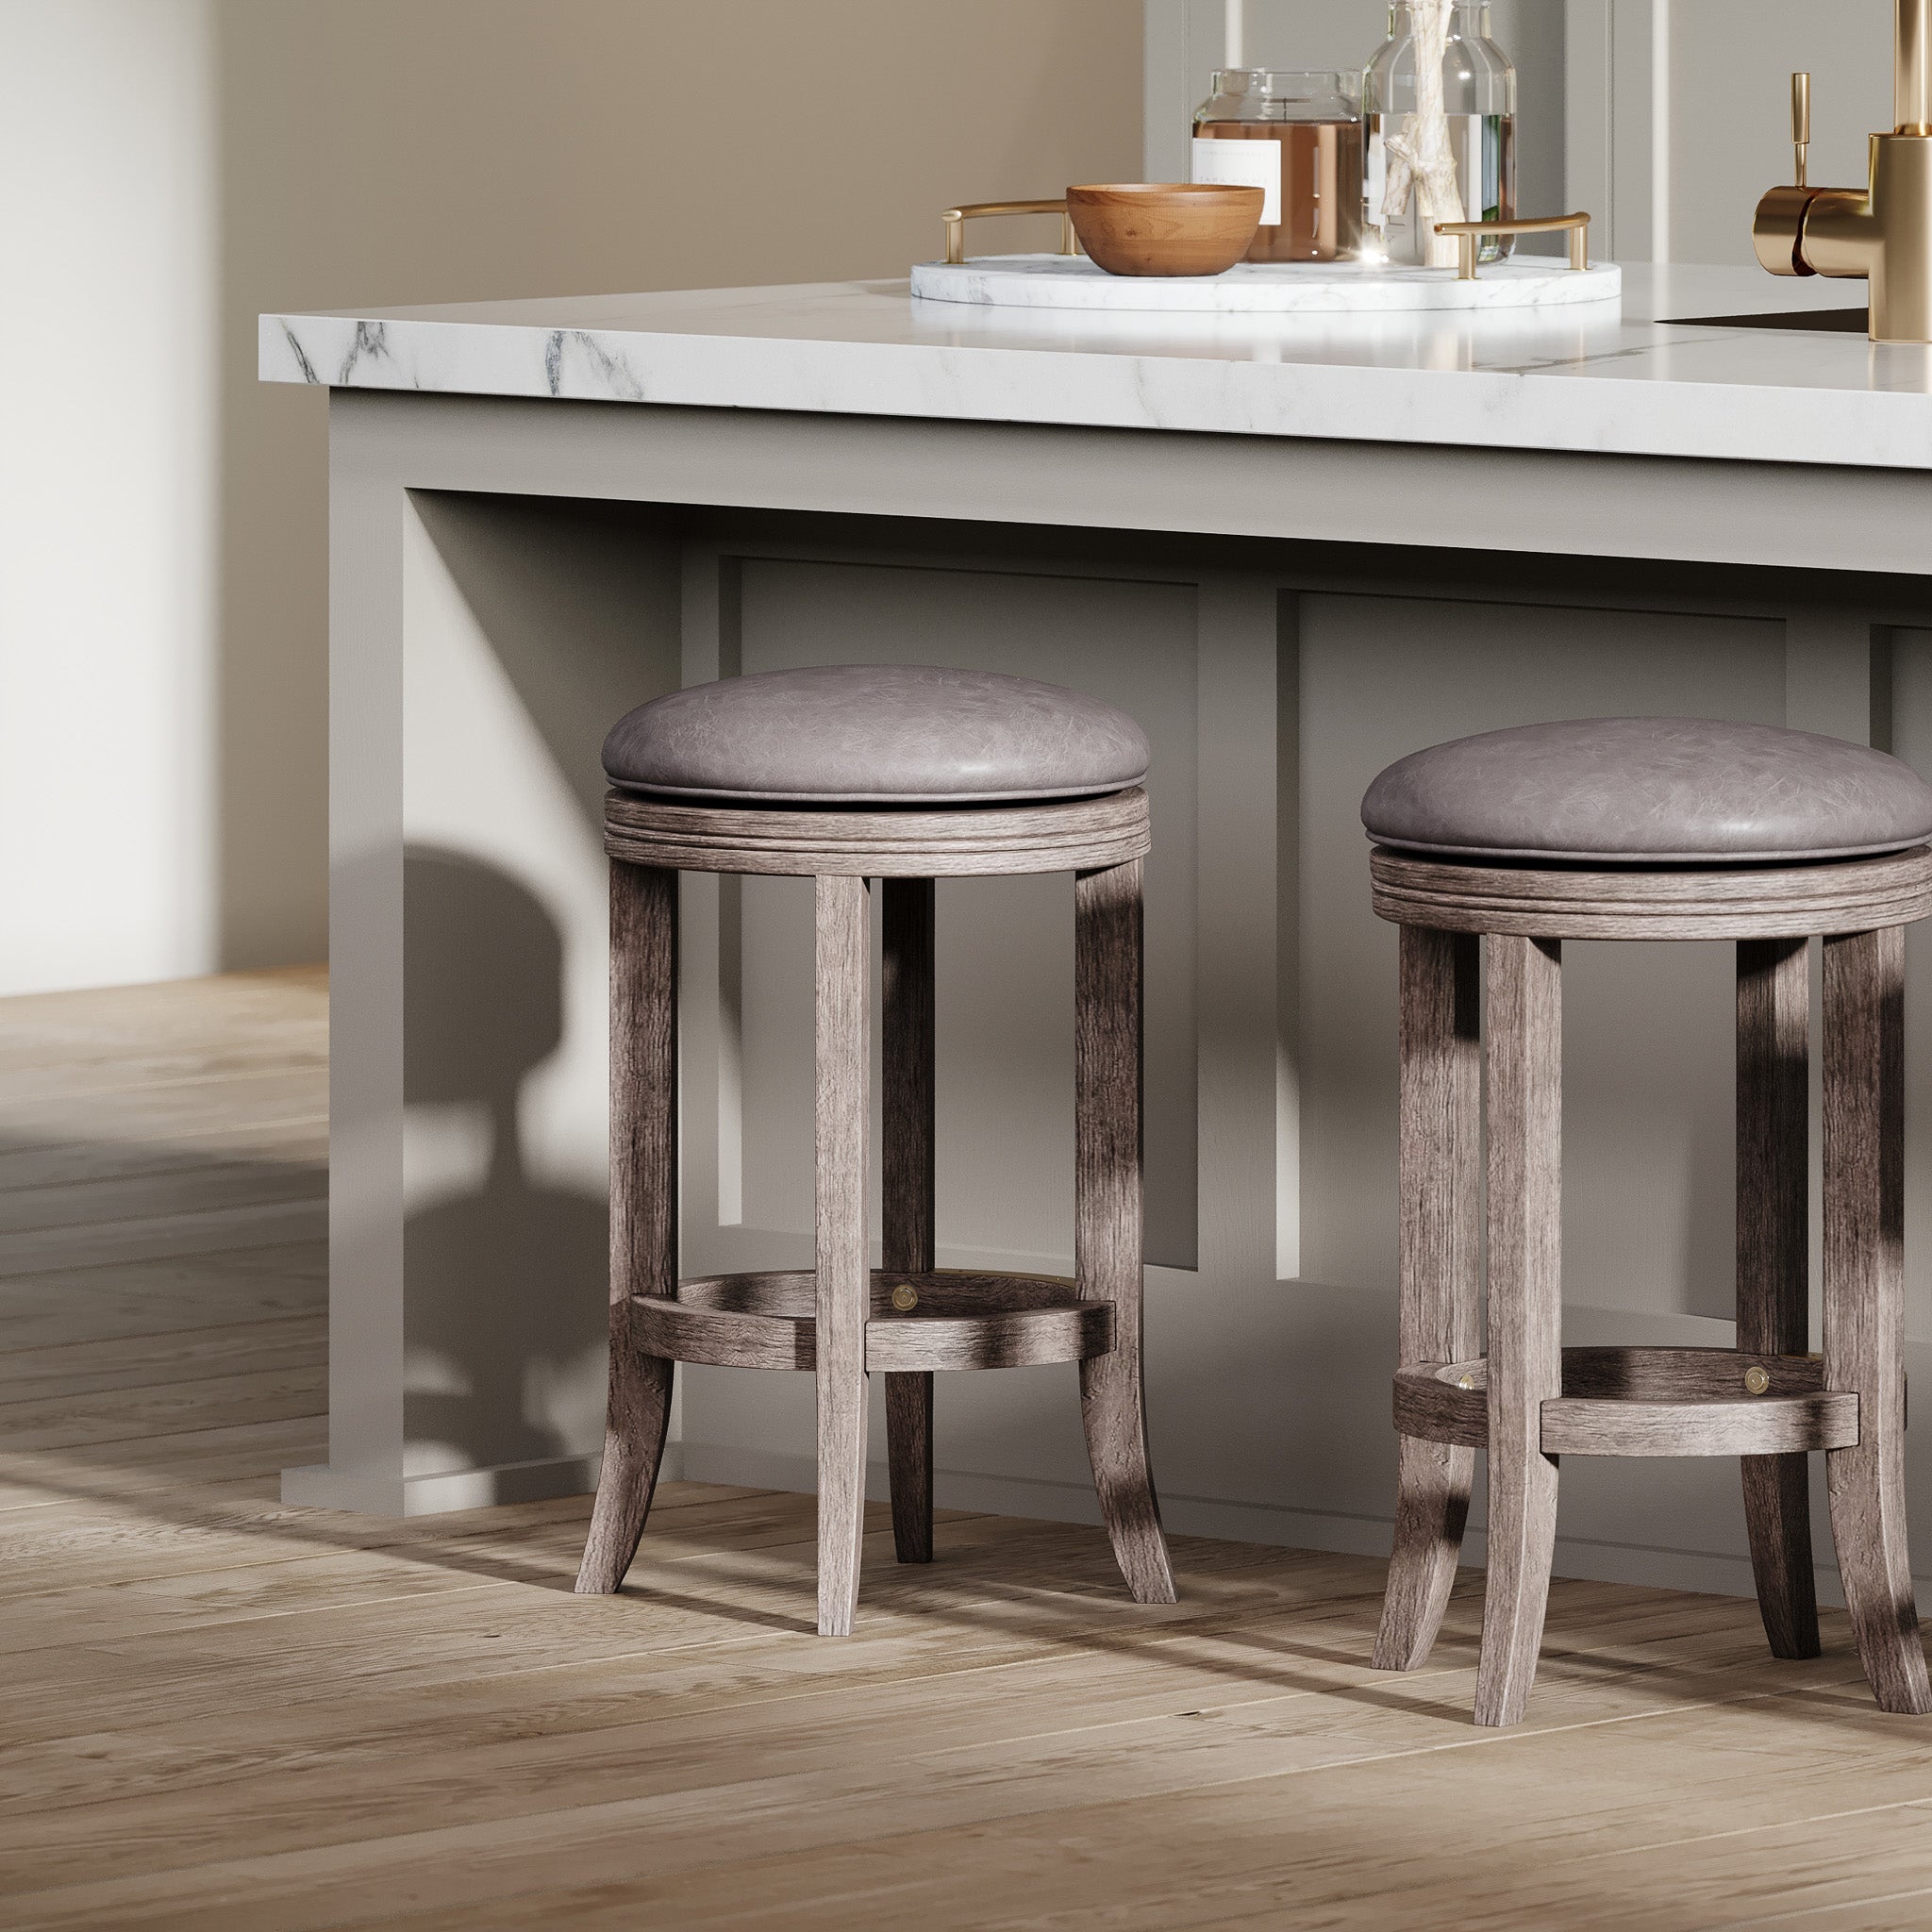 Eva Counter Stool in Reclaimed Oak Finish with Ronan Stone Vegan Leather in Stools by Maven Lane